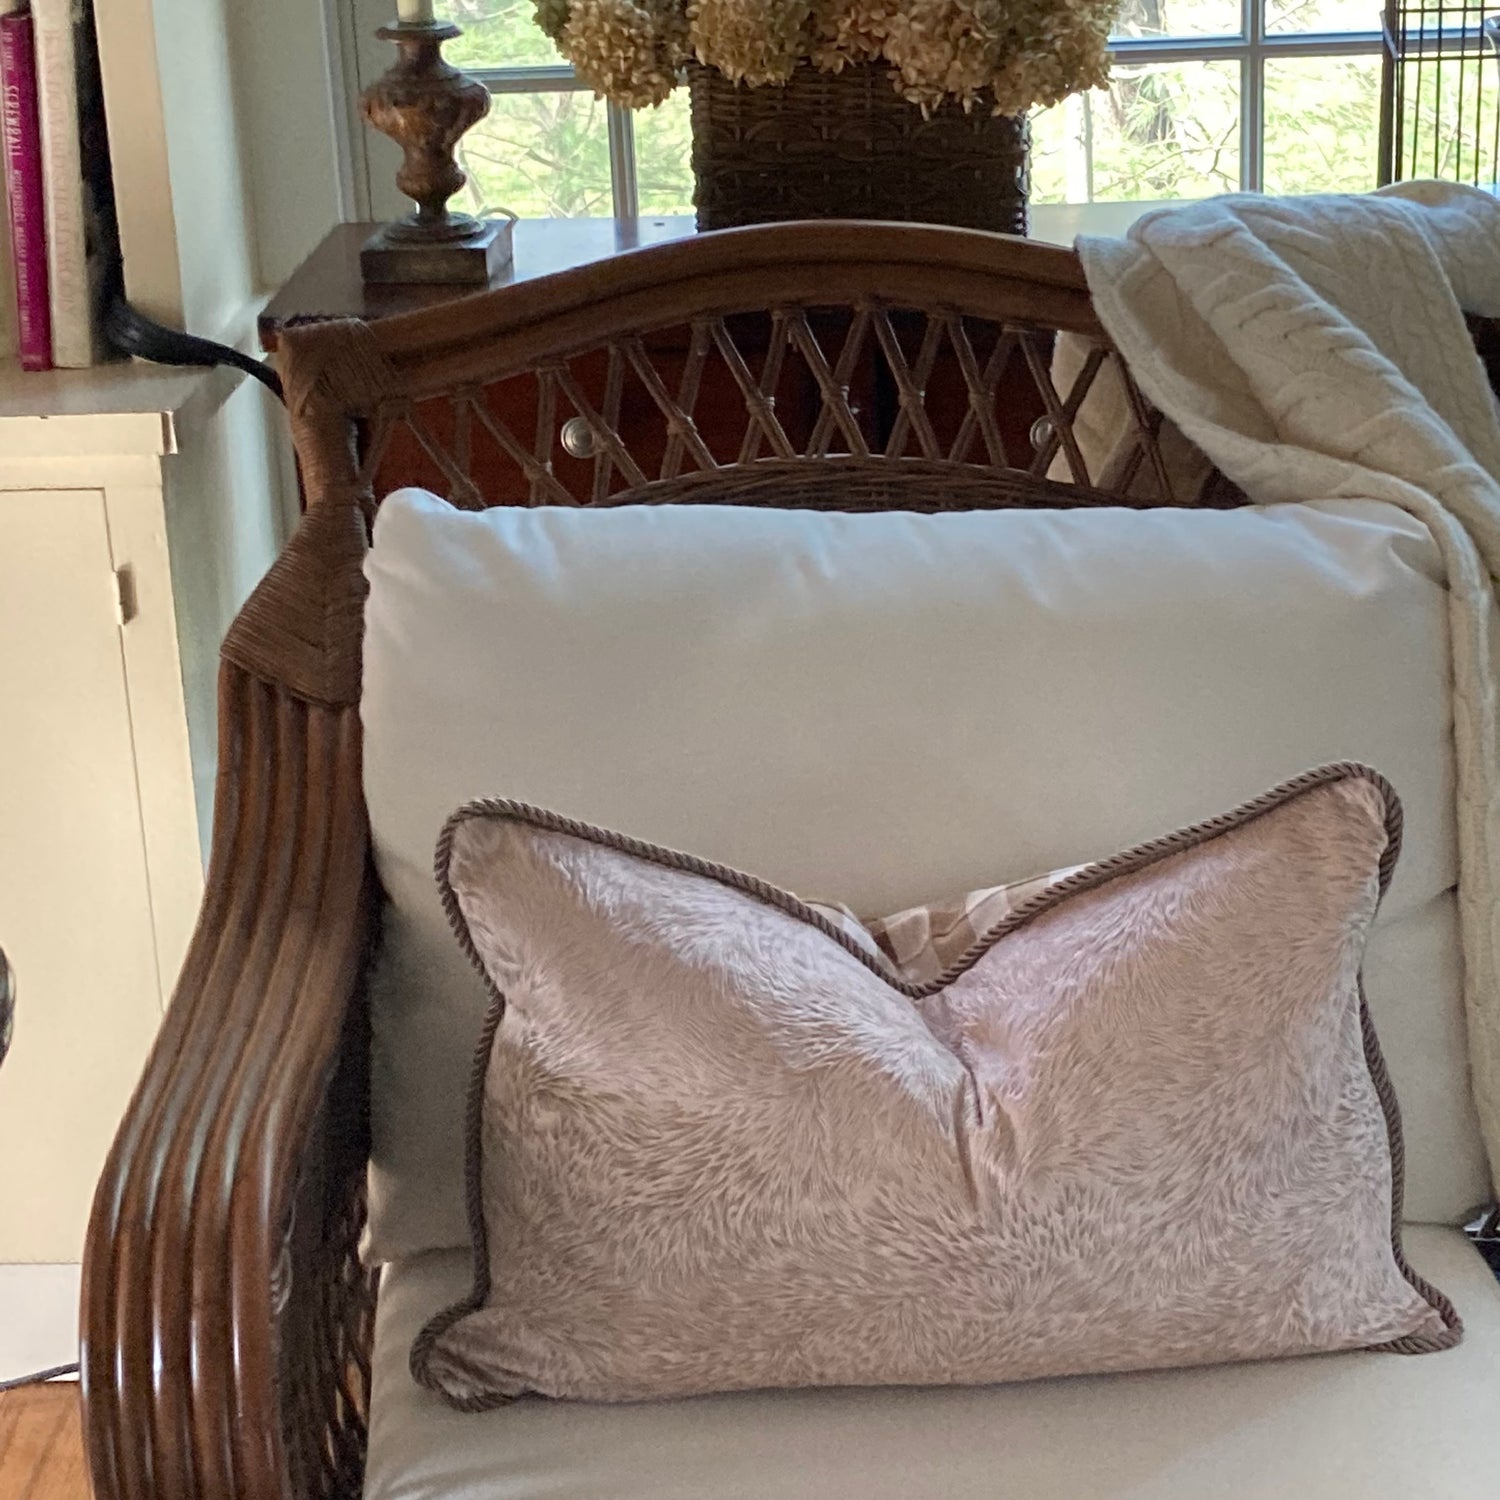 Dusty Mauve and Cocoa Velvet Boho 16 X 24 Rectangle Decorative Lumbar Designer Pillow with Down Feather Insert